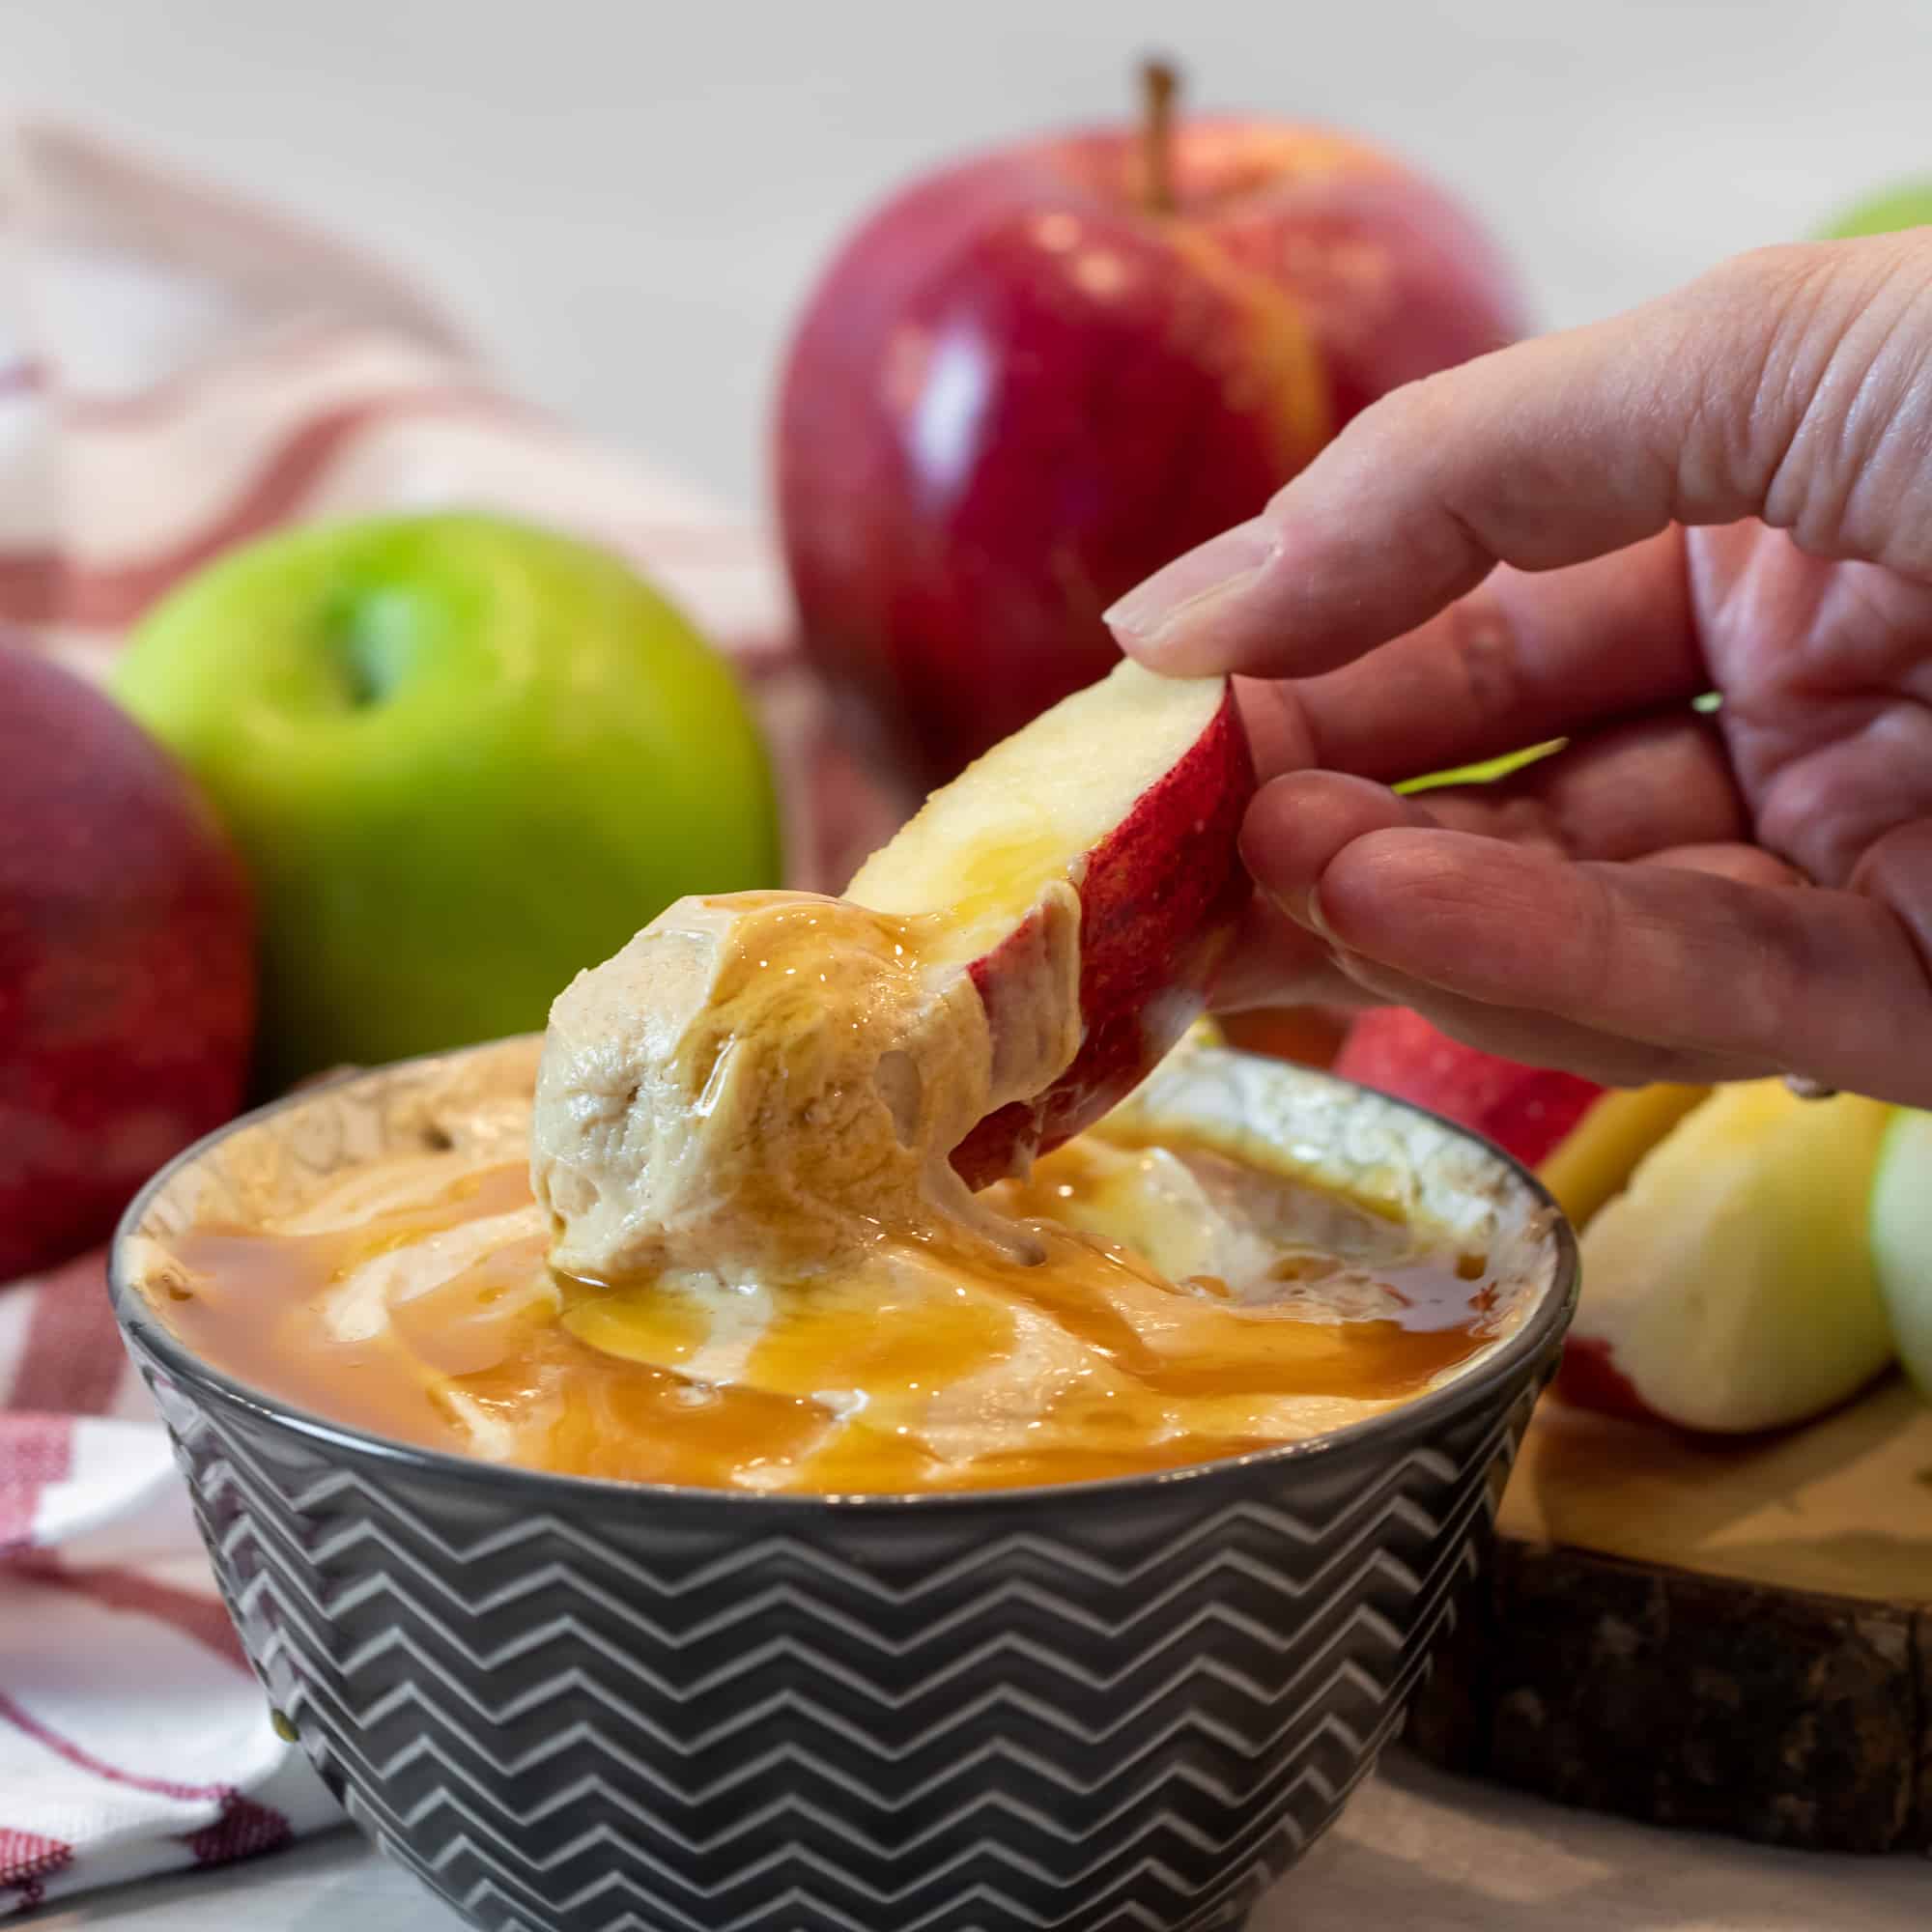 Apple sliced dipped into a bowl of caramel peanut butter spread.